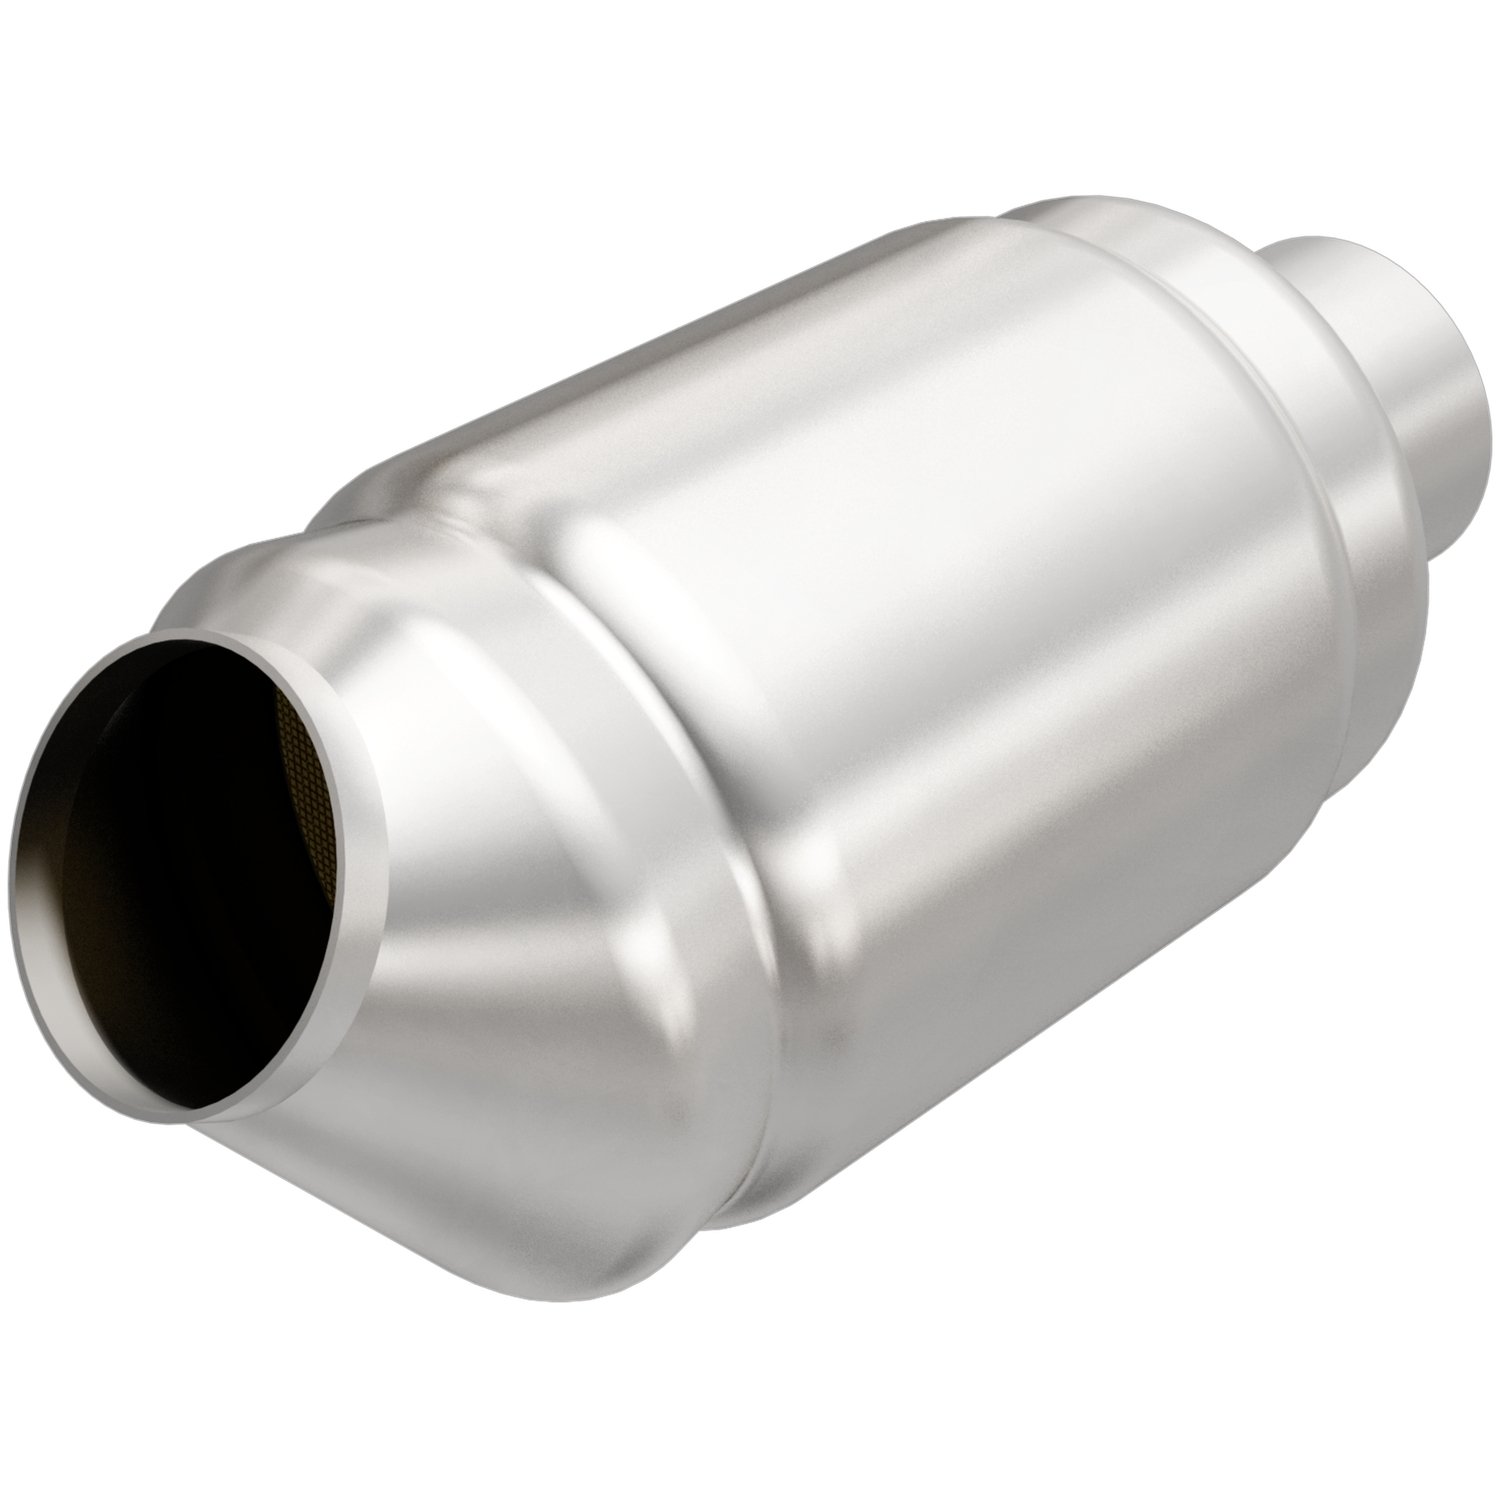 Pre OBD-II Spun Catalytic Converter Inlet/Outlet: 2.25" (Angled Inlet)